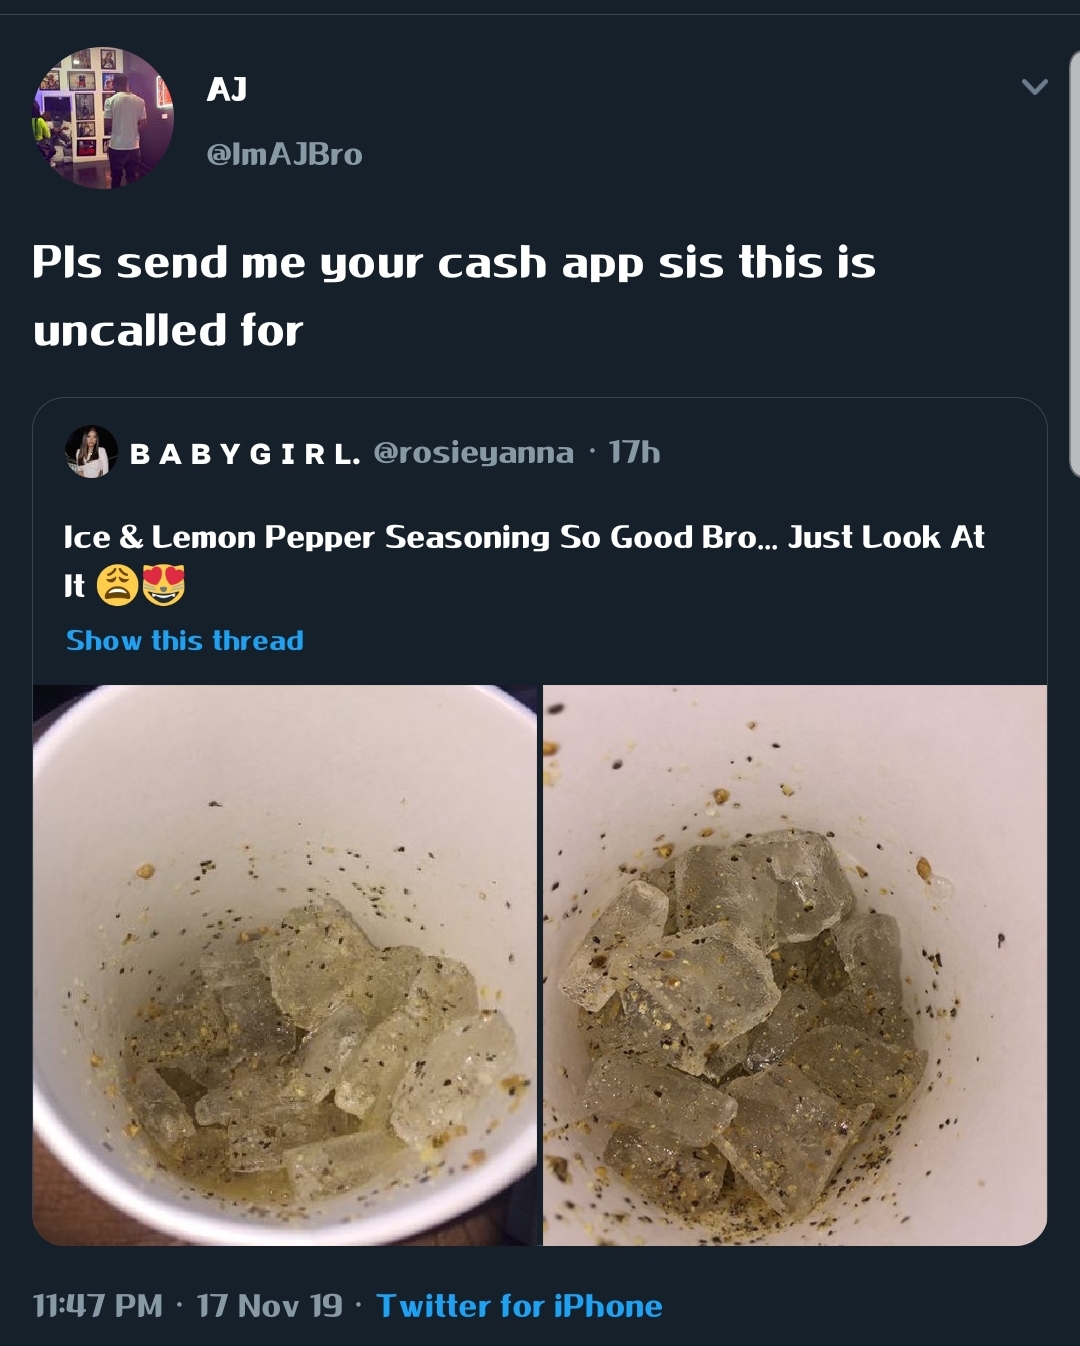 mineral - Ataj Pls send me your cash app sis this is uncalled for & Baby Girl. erosieyanna. 17h Ice & Lemon Pepper Seasoning So Good Bro... Just Look At Show this thread 17 Nov 19. Twitter for iPhone